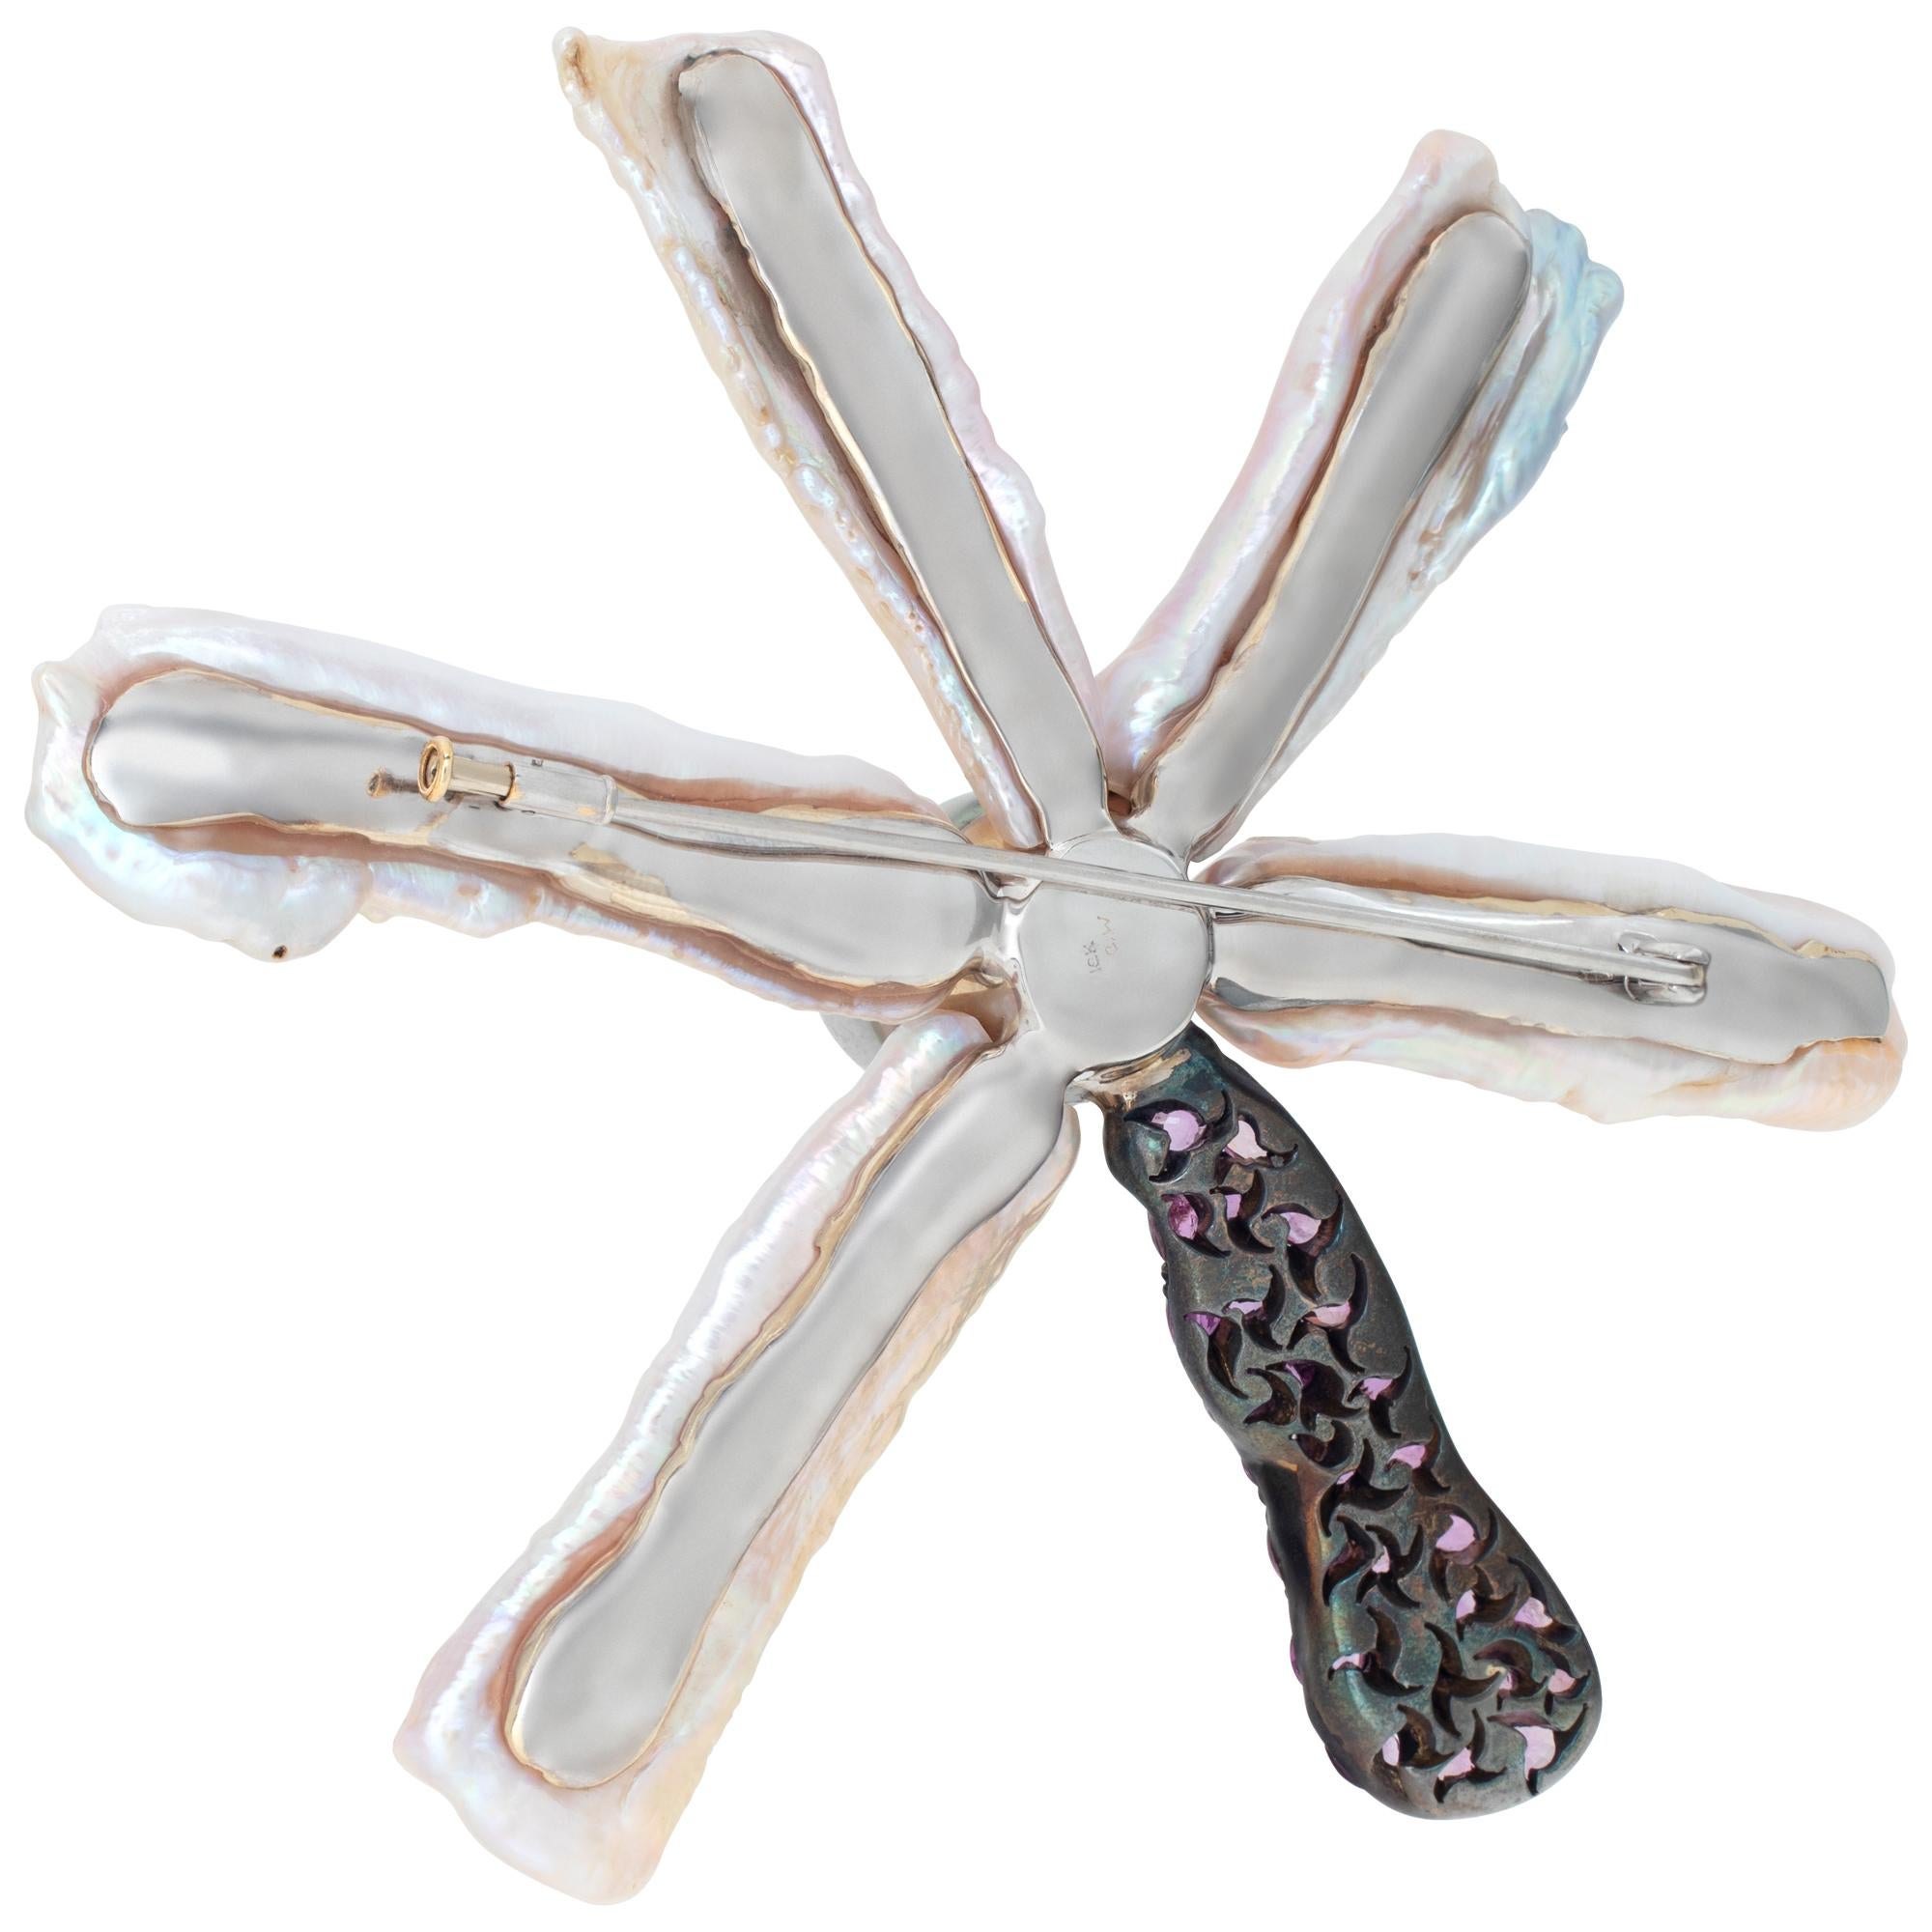 Christopher Walling multi-gem flower brooch in 18k white gold. Contains five cultured biwa pearl petals, 25 oval mixed cut pink sapphires and a center 16.5 mm black Tahitian pearl. Brooch is 4.25 inches in diameter. Can be converted to a pendant to